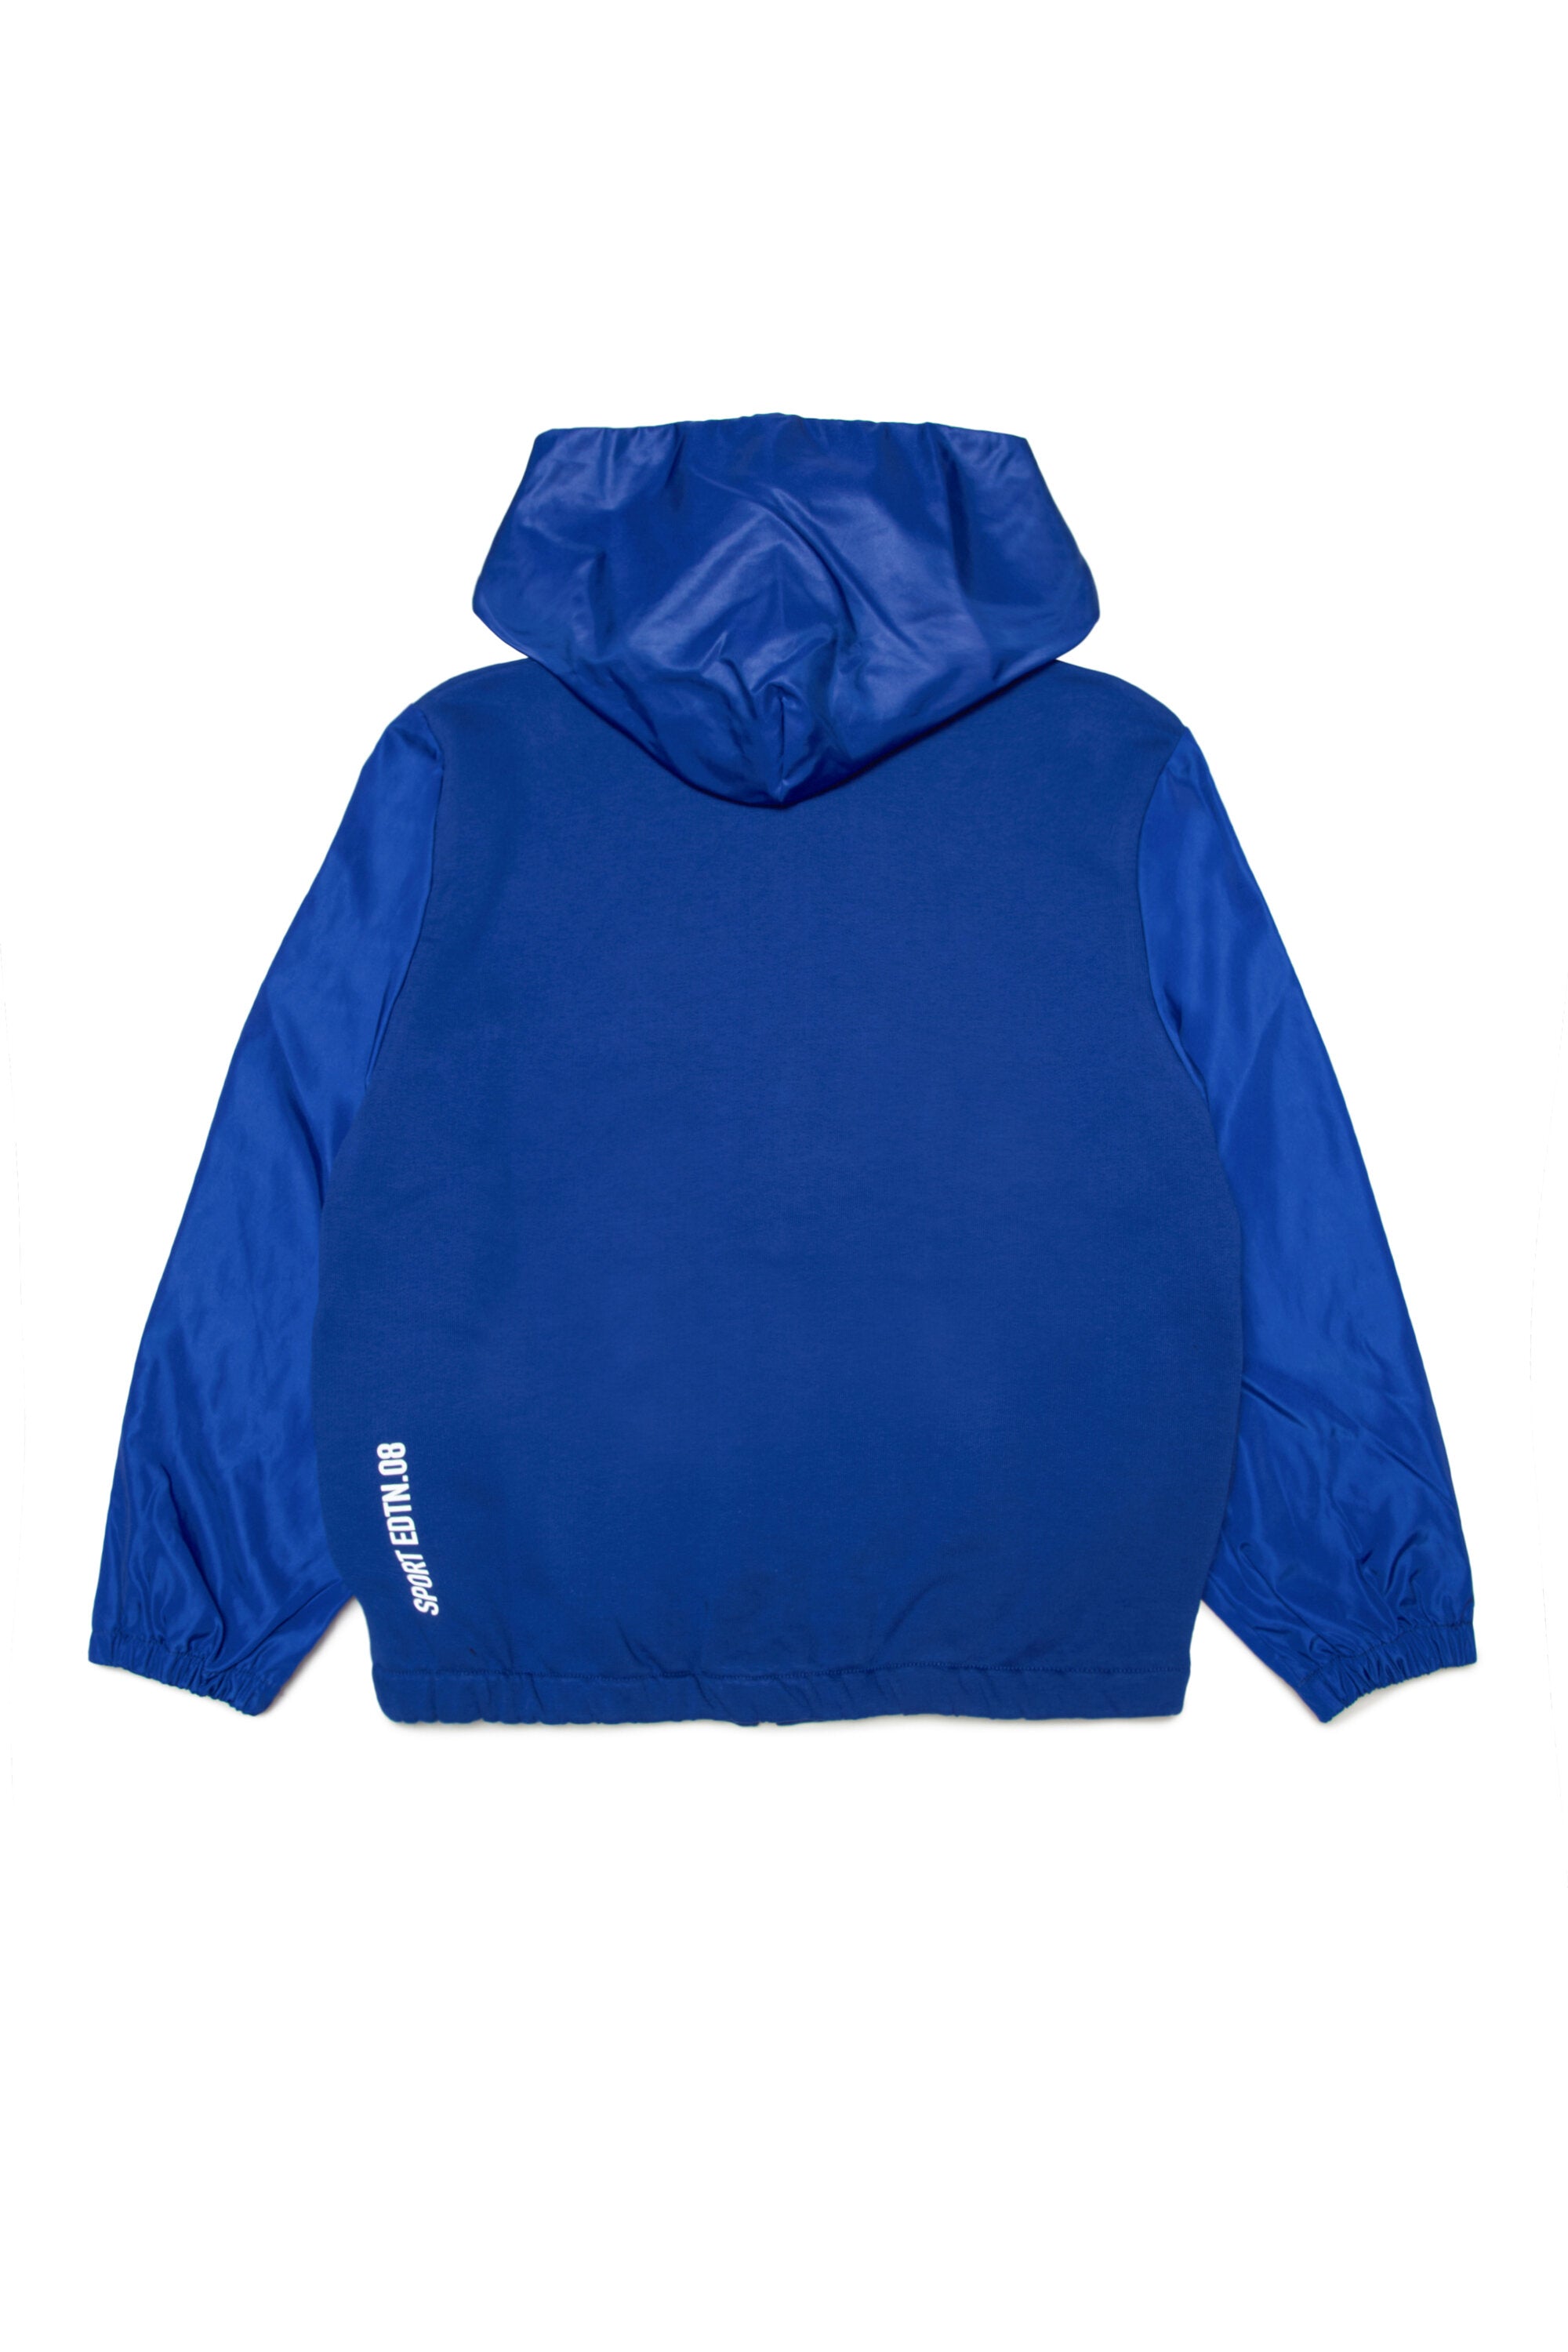 Hooded sweatshirt with zip and D2 Leaf graphics